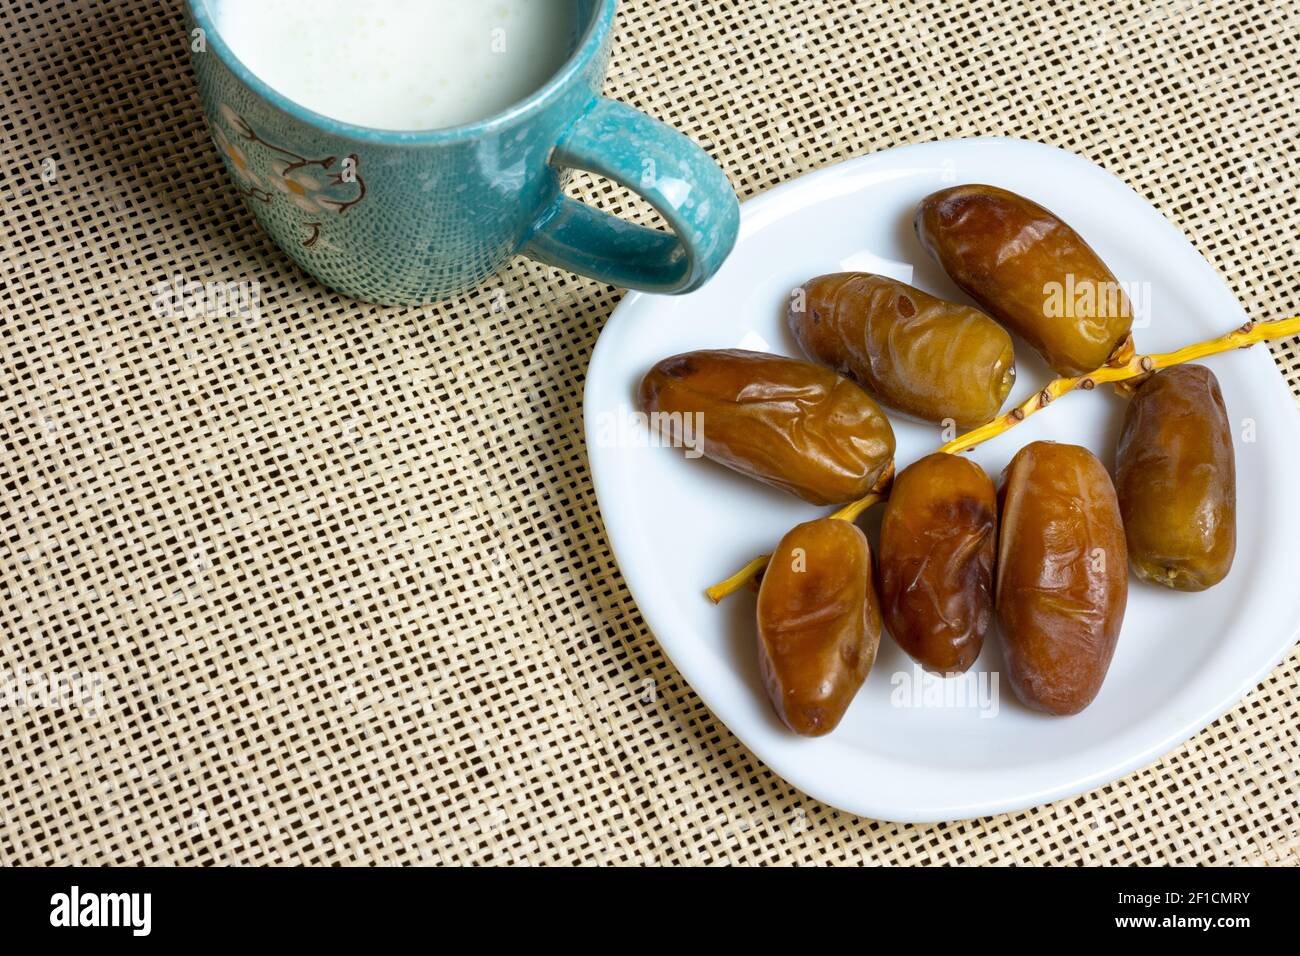 Top view of Algerian dates on a white plate with a mug of milk, Ramadan concept, space for text Stock Photo